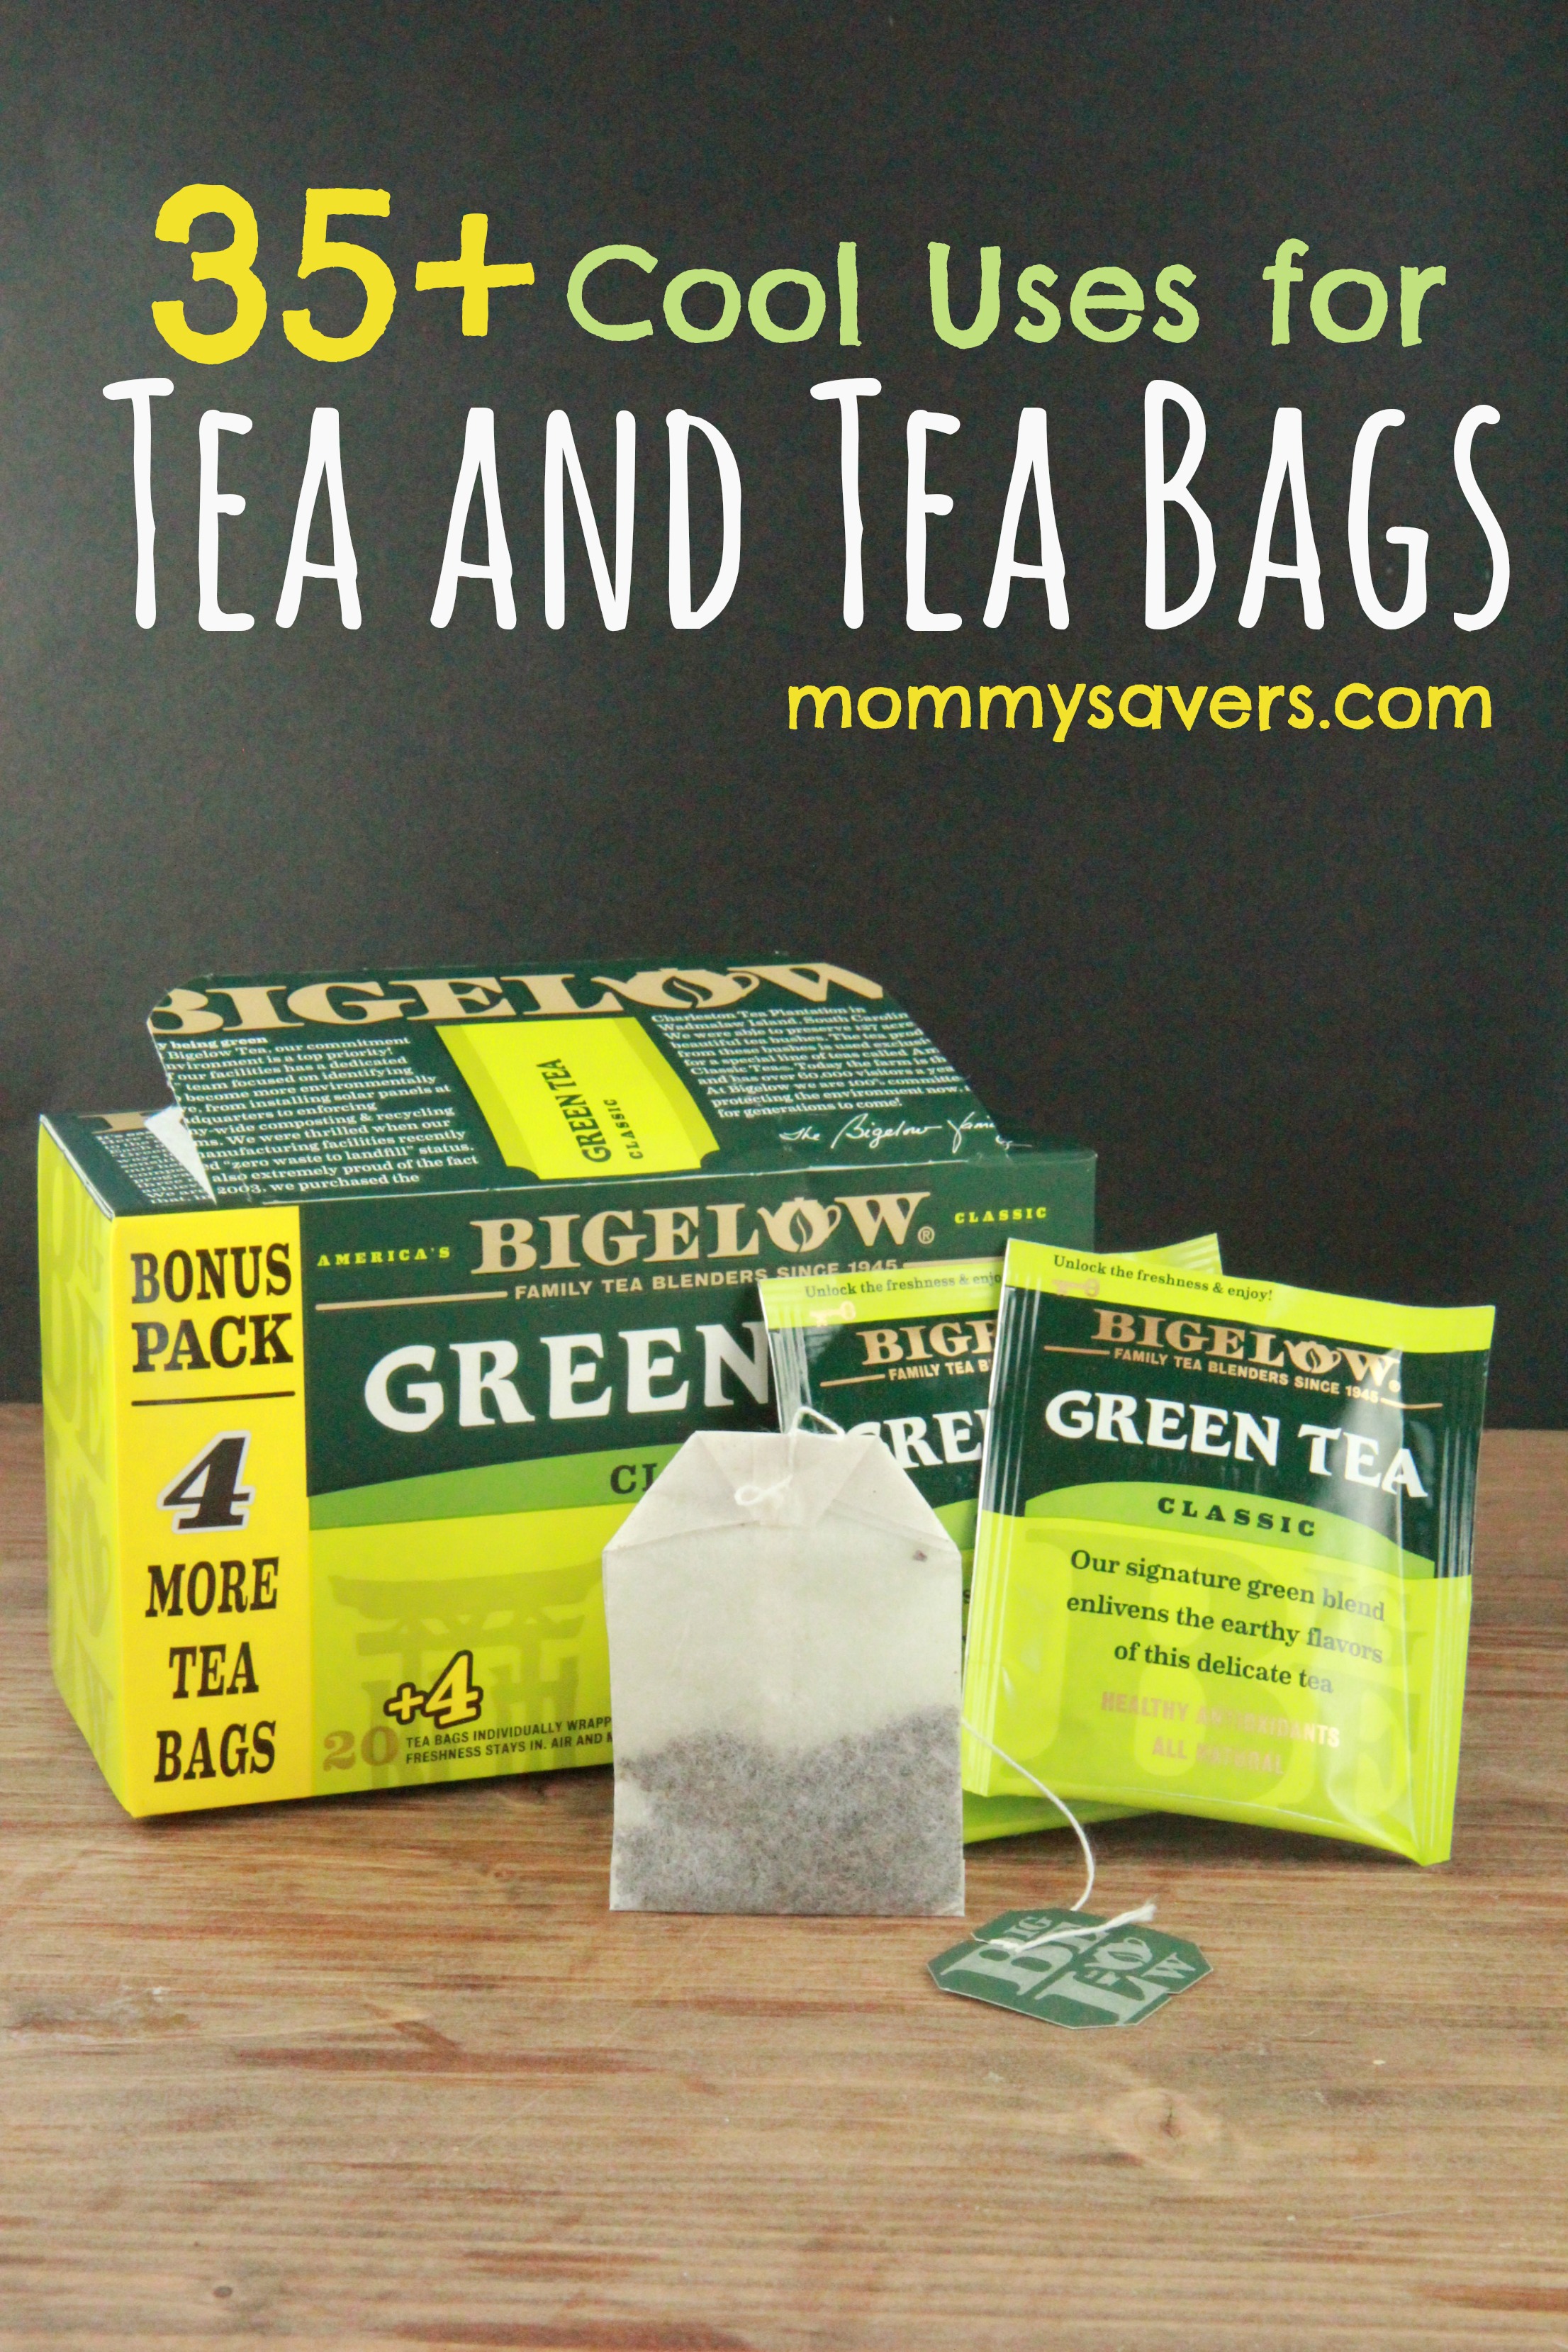 Uses for Tea Bags and Leaves: 35+ Clever Ideas - Mommysavers